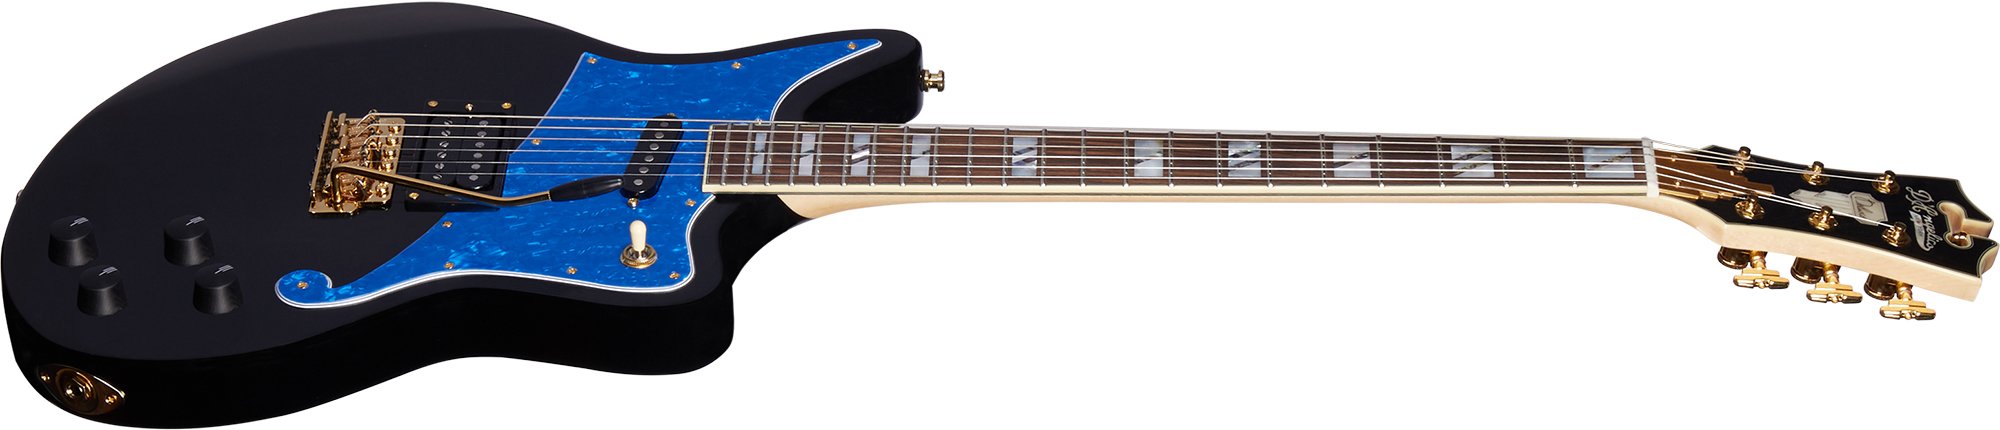 Deluxe Bedford Black with Blue Pearl Pickguard and Tremolo angle